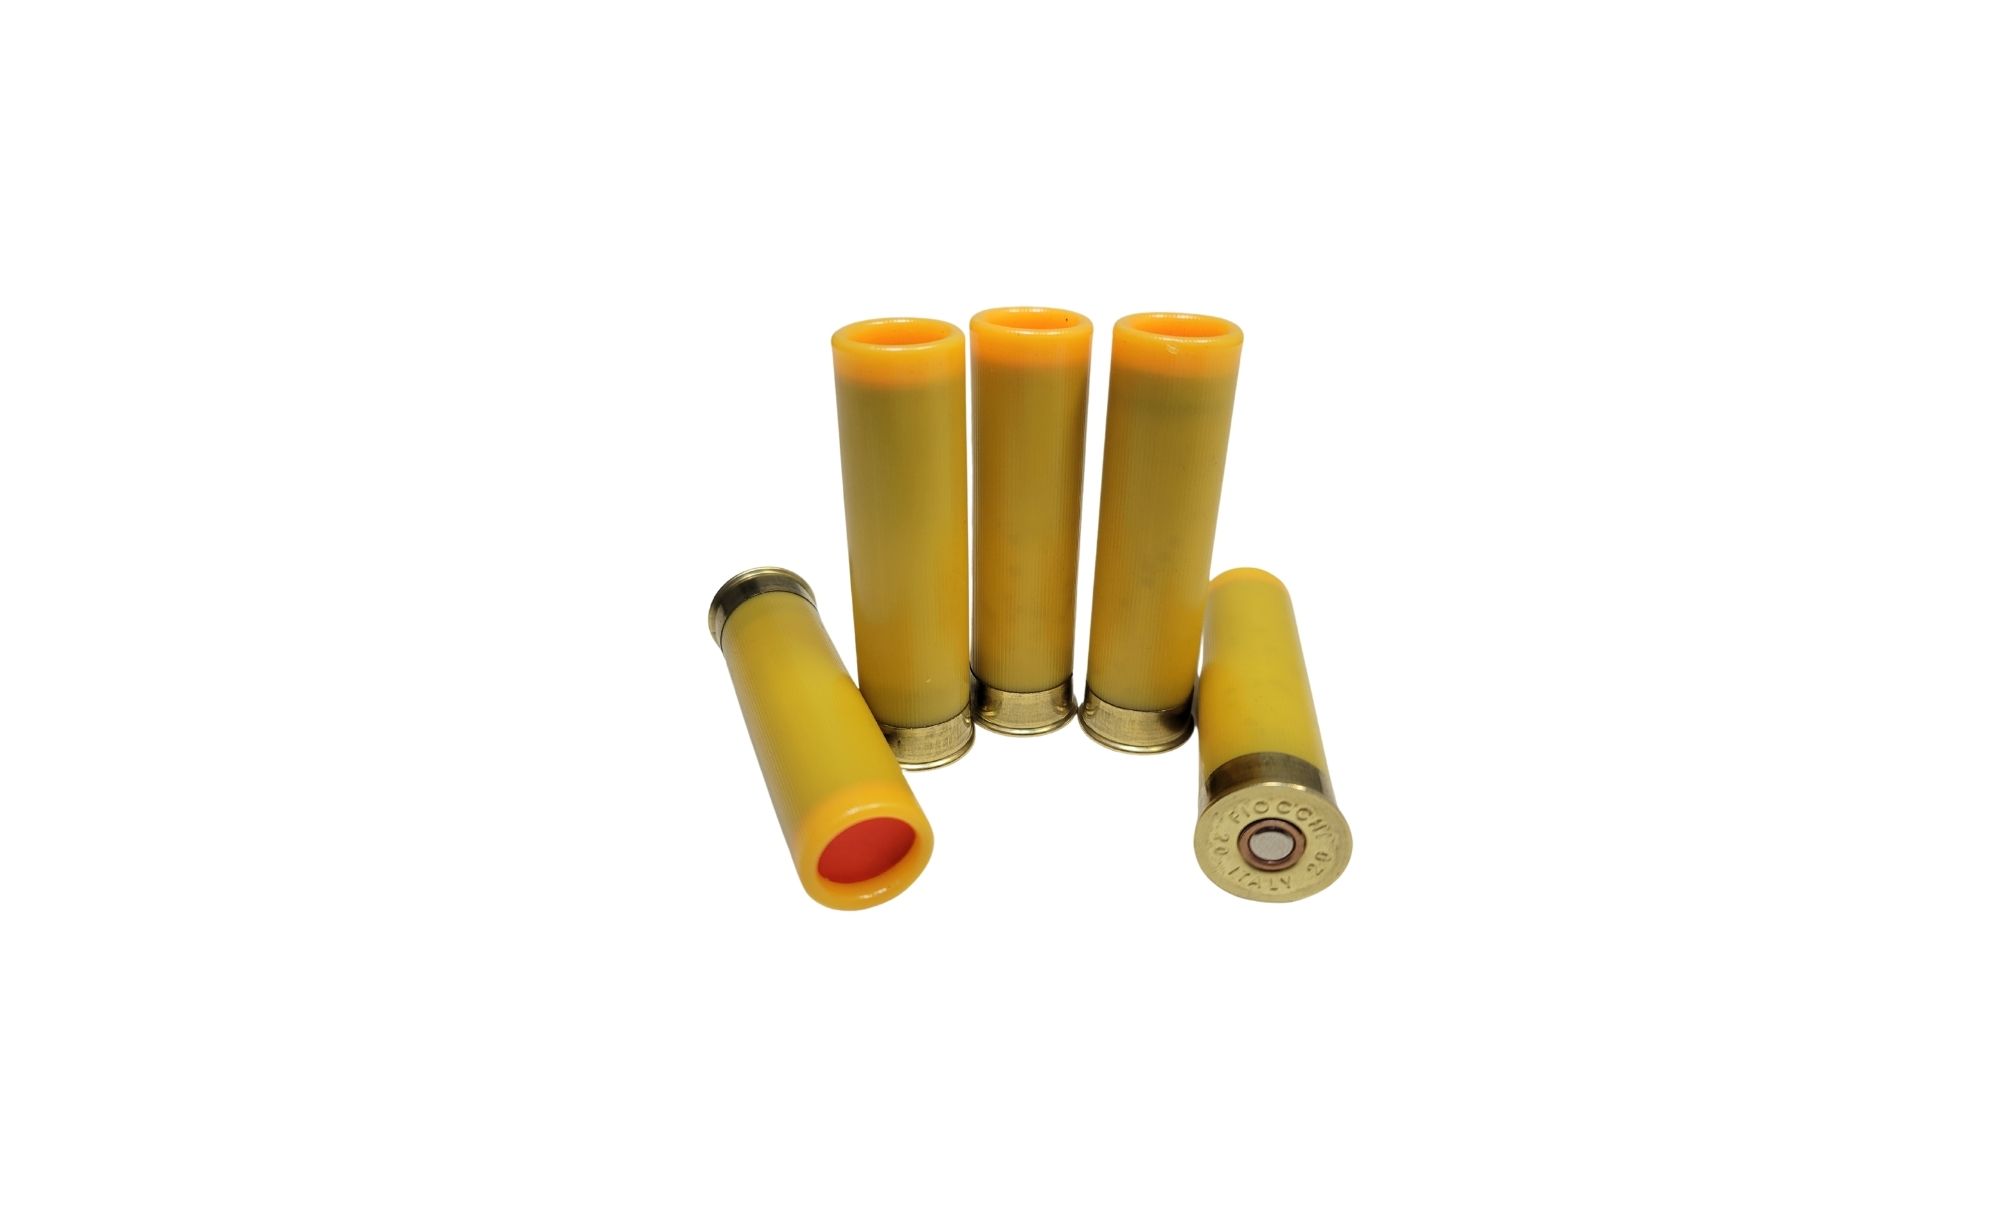 Winchester 20 Gauge SUPER-TARGET TRGT207 2-3/4″ 7/8oz #7-1/2 shot 1200 FPS – 25 Rounds (Box) [NO TAX outside Texas] Product Image